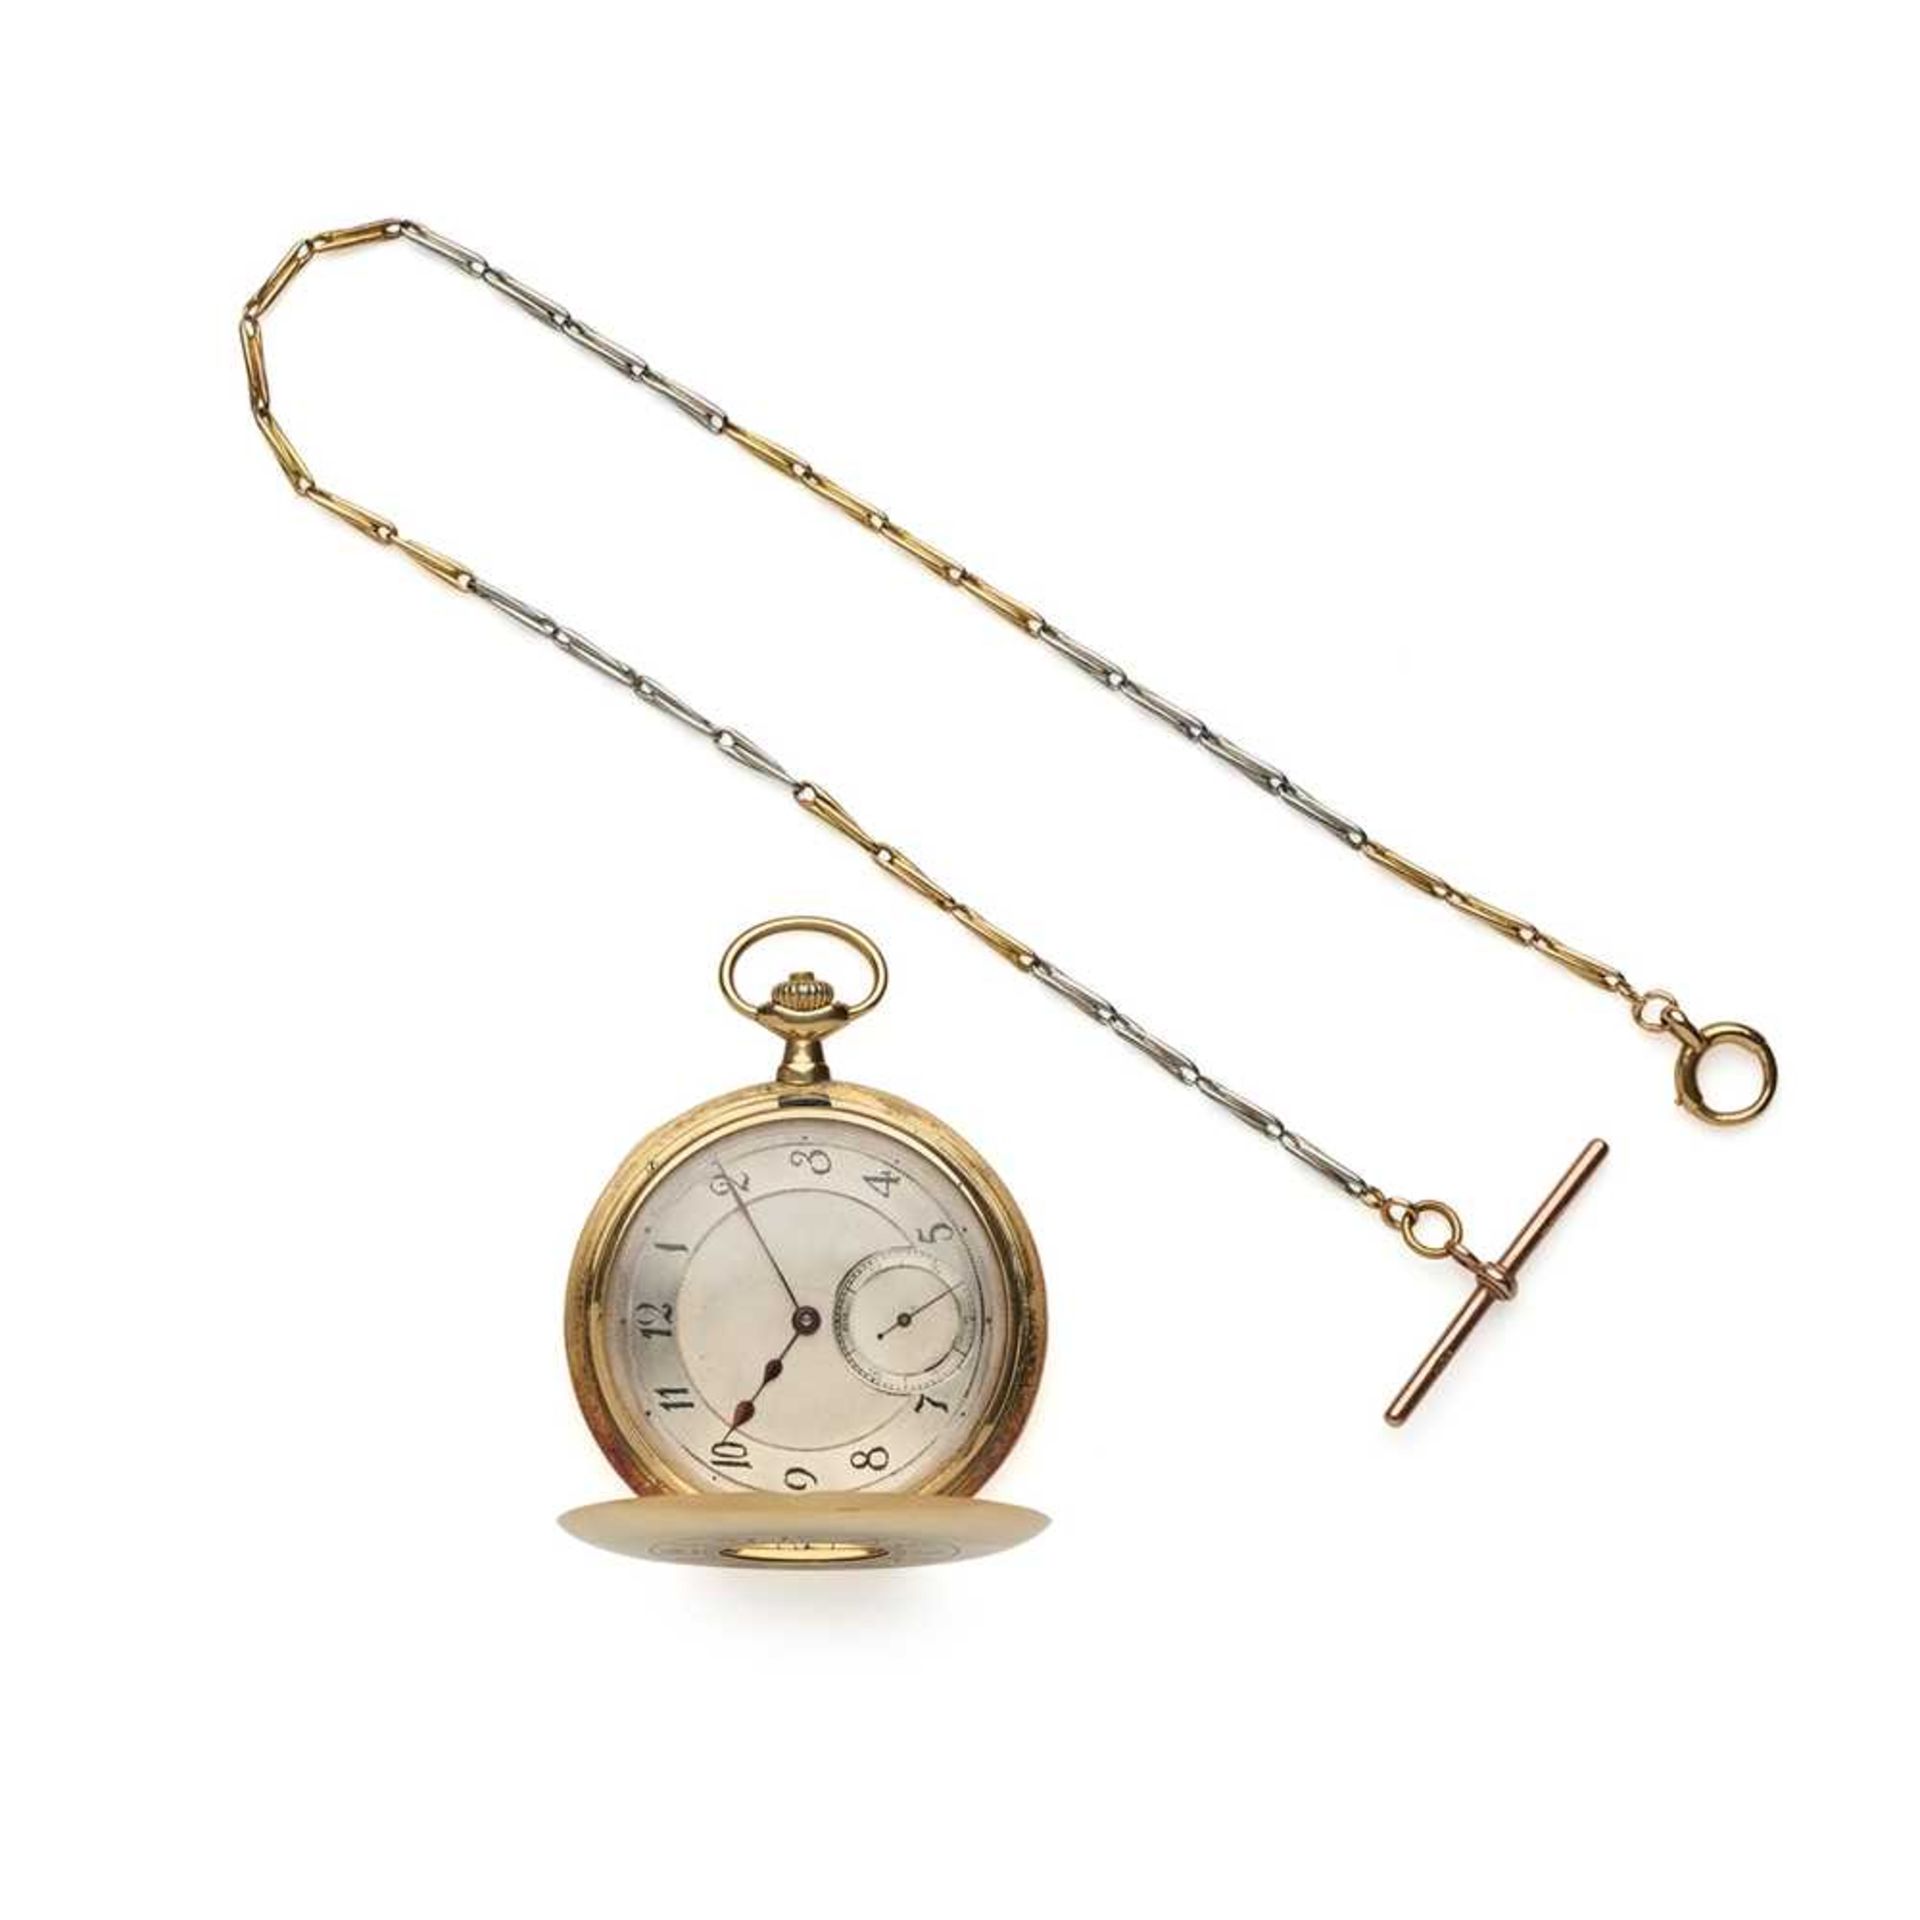 Le Roy et Fils: gold pocket watch and chain - Image 2 of 2